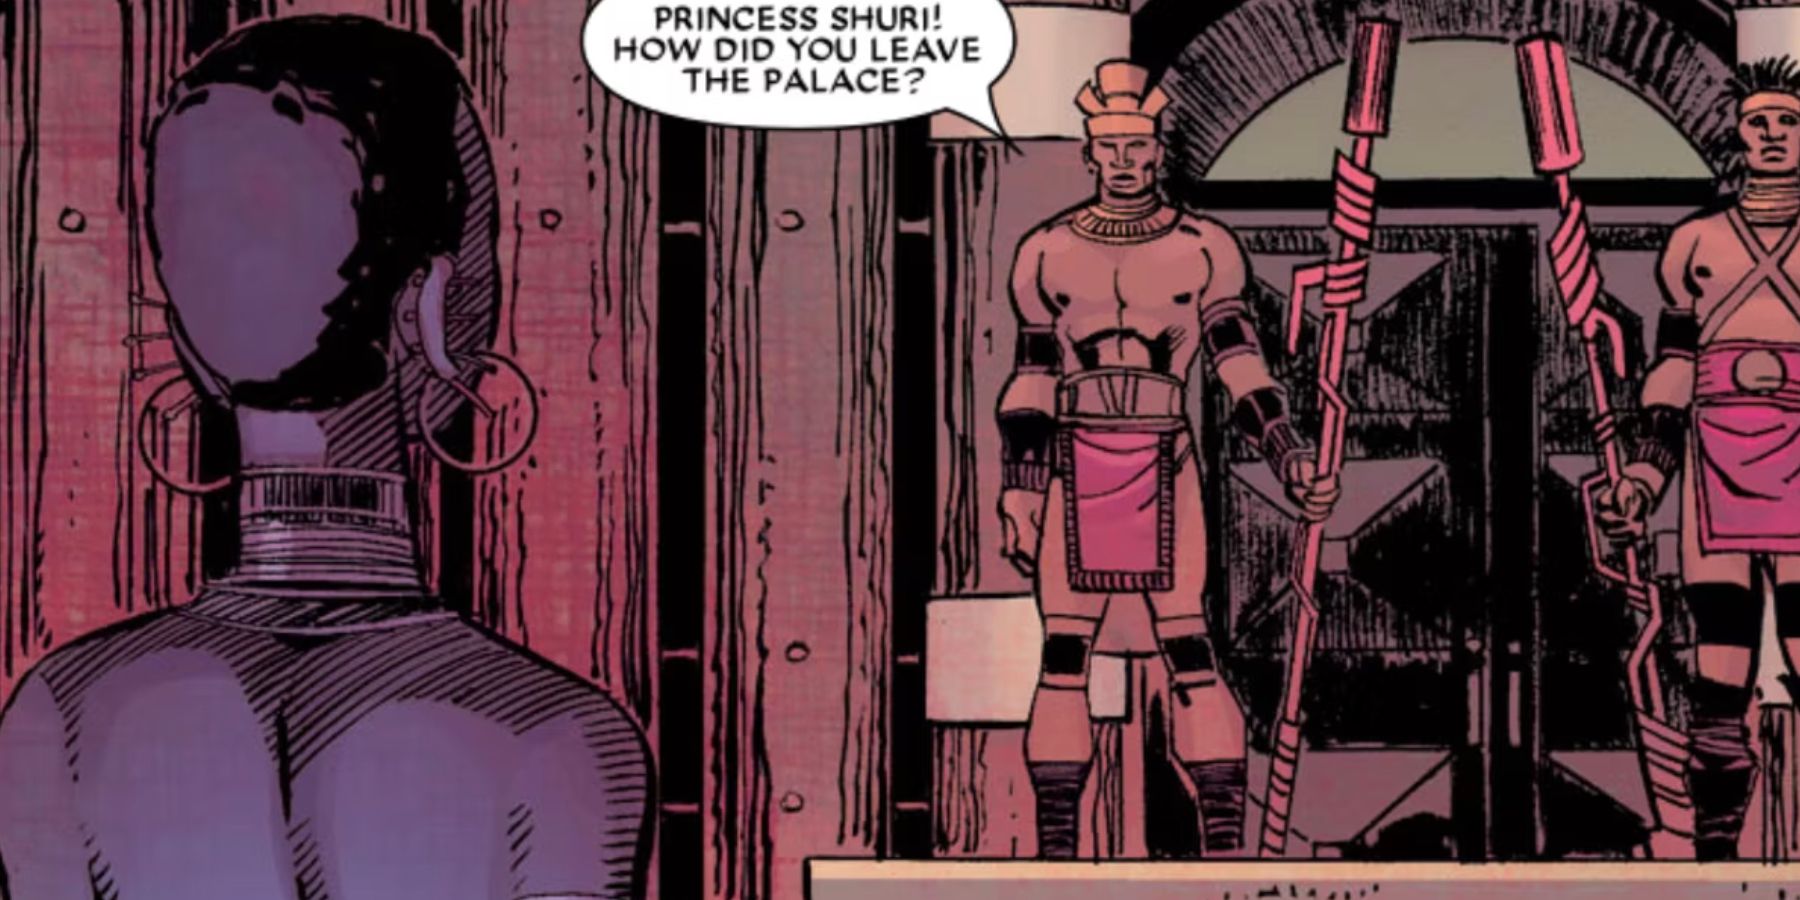 Shuri runs into palace guards in Black Panther comic in 2005